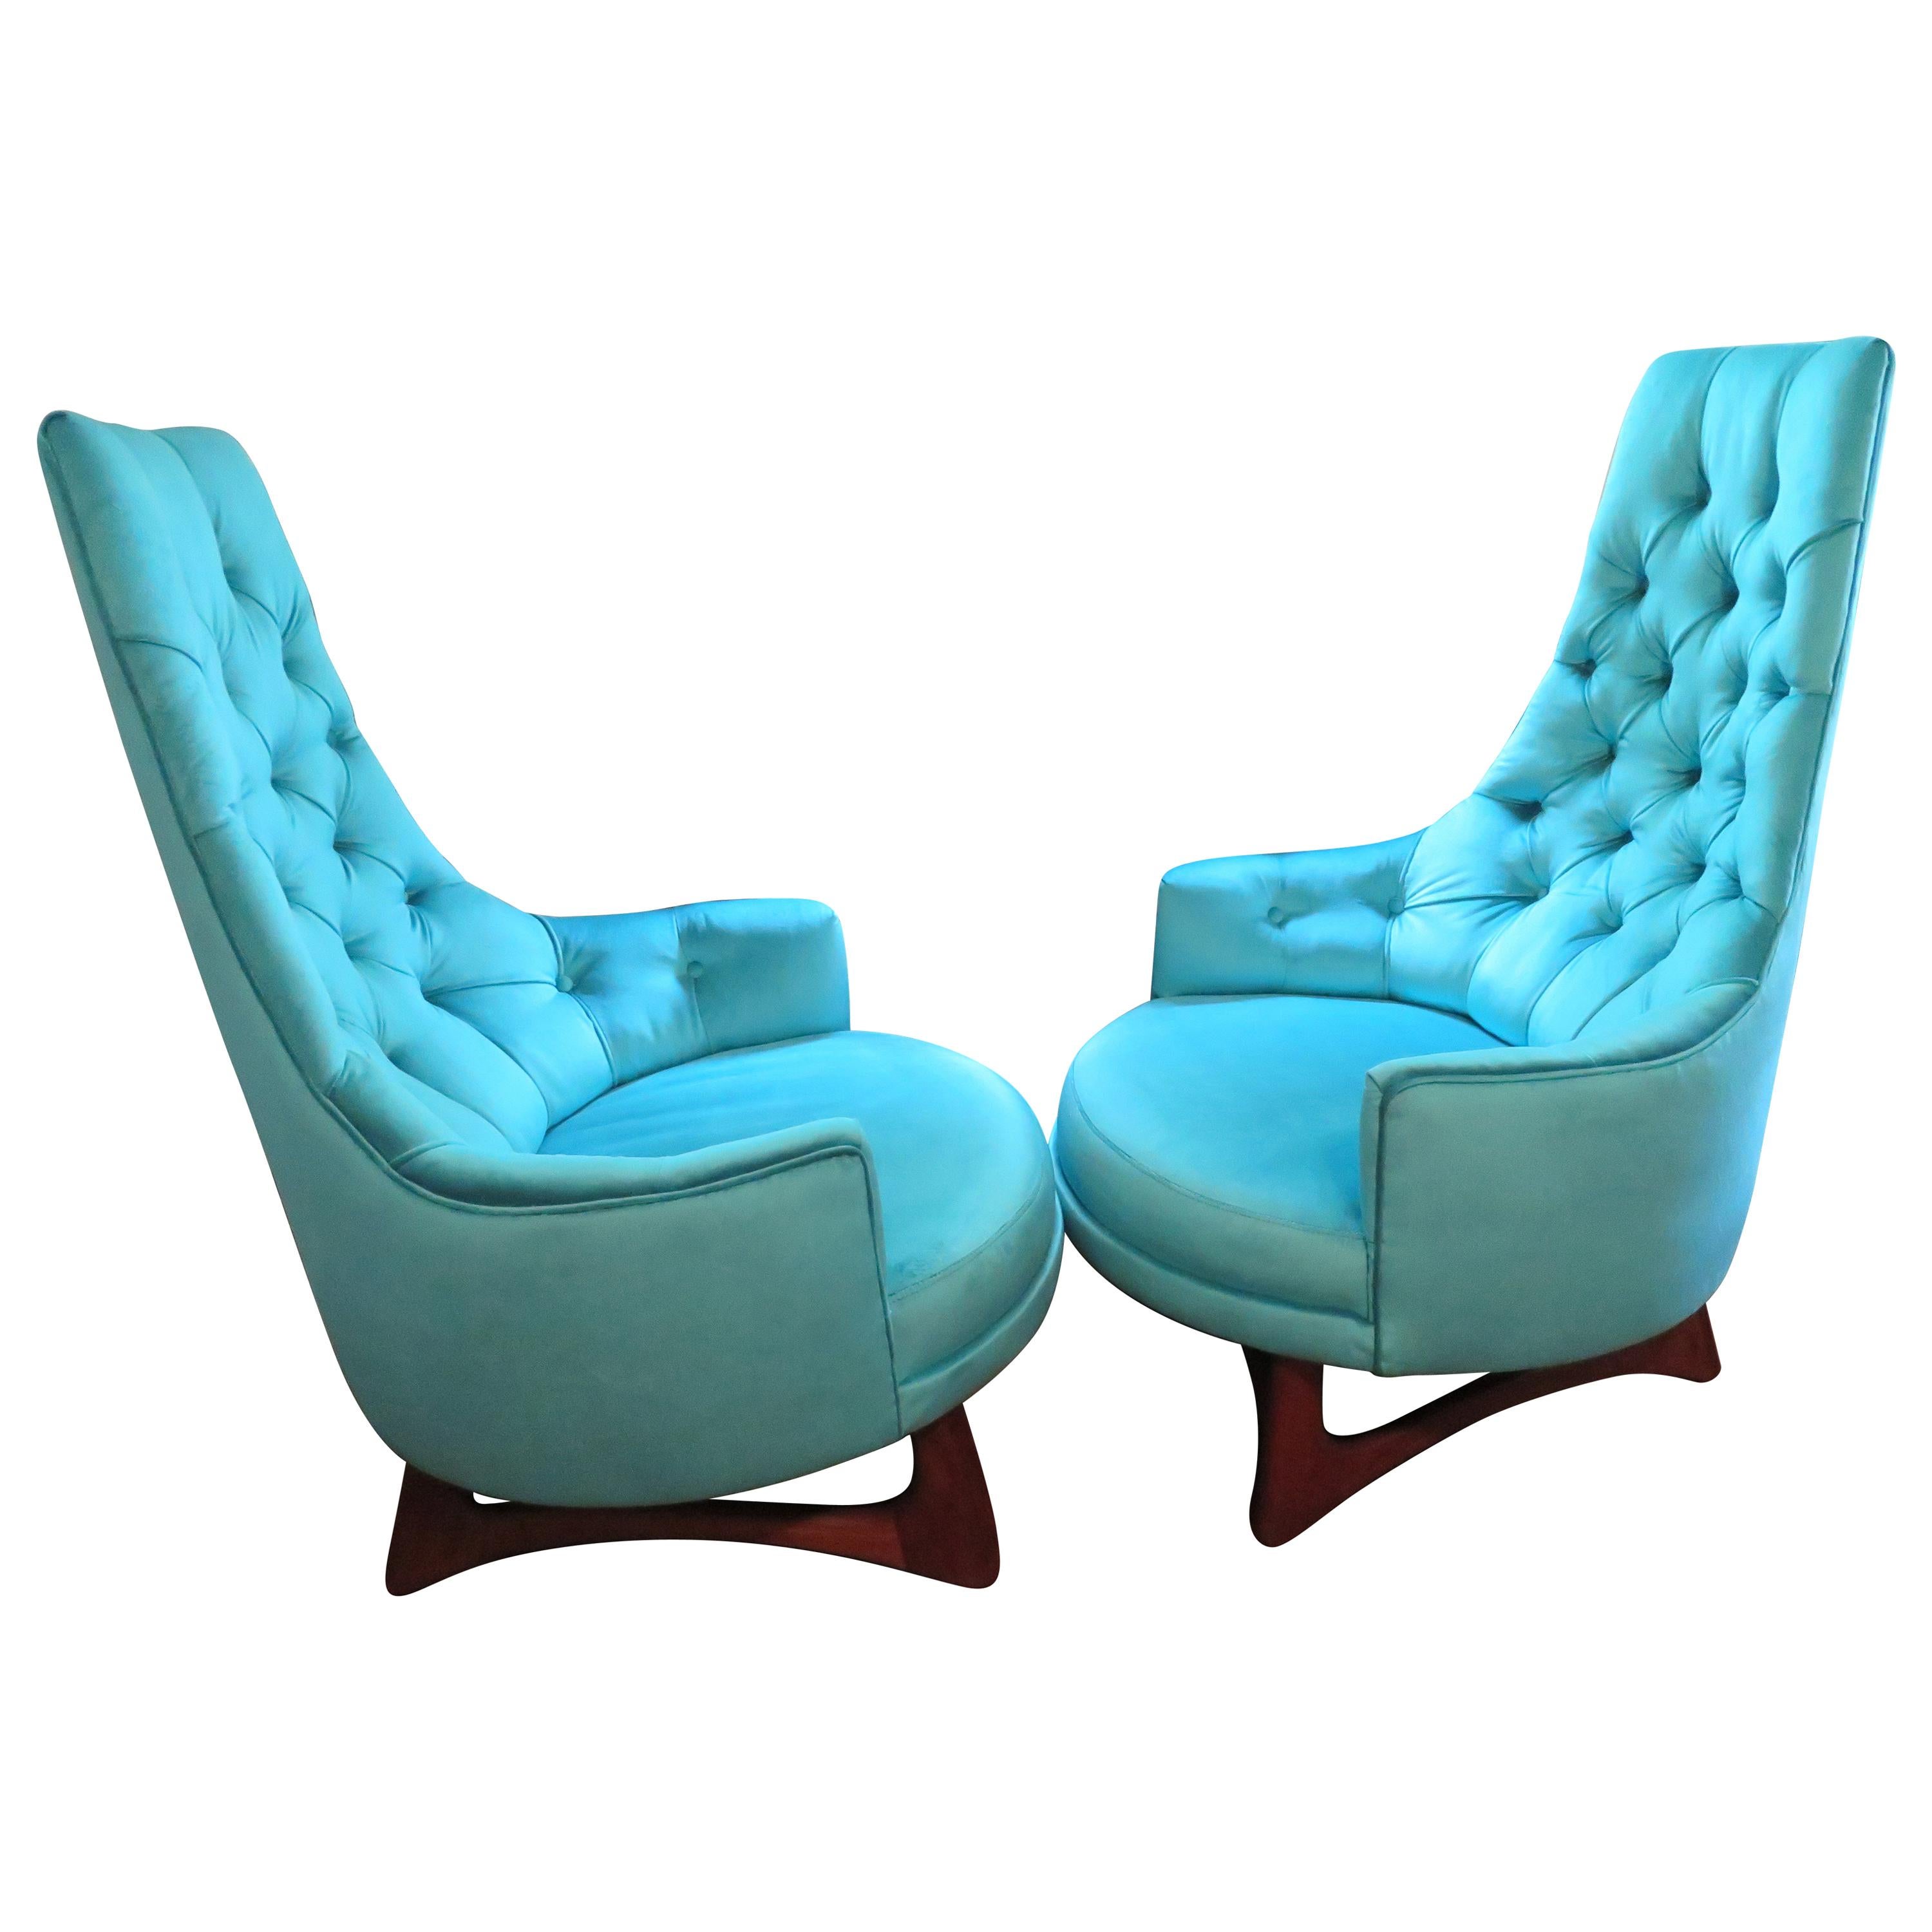 Pair of Adrian Pearsall Tall Back Tufted Sculpted Walnut Base Lounge Chair